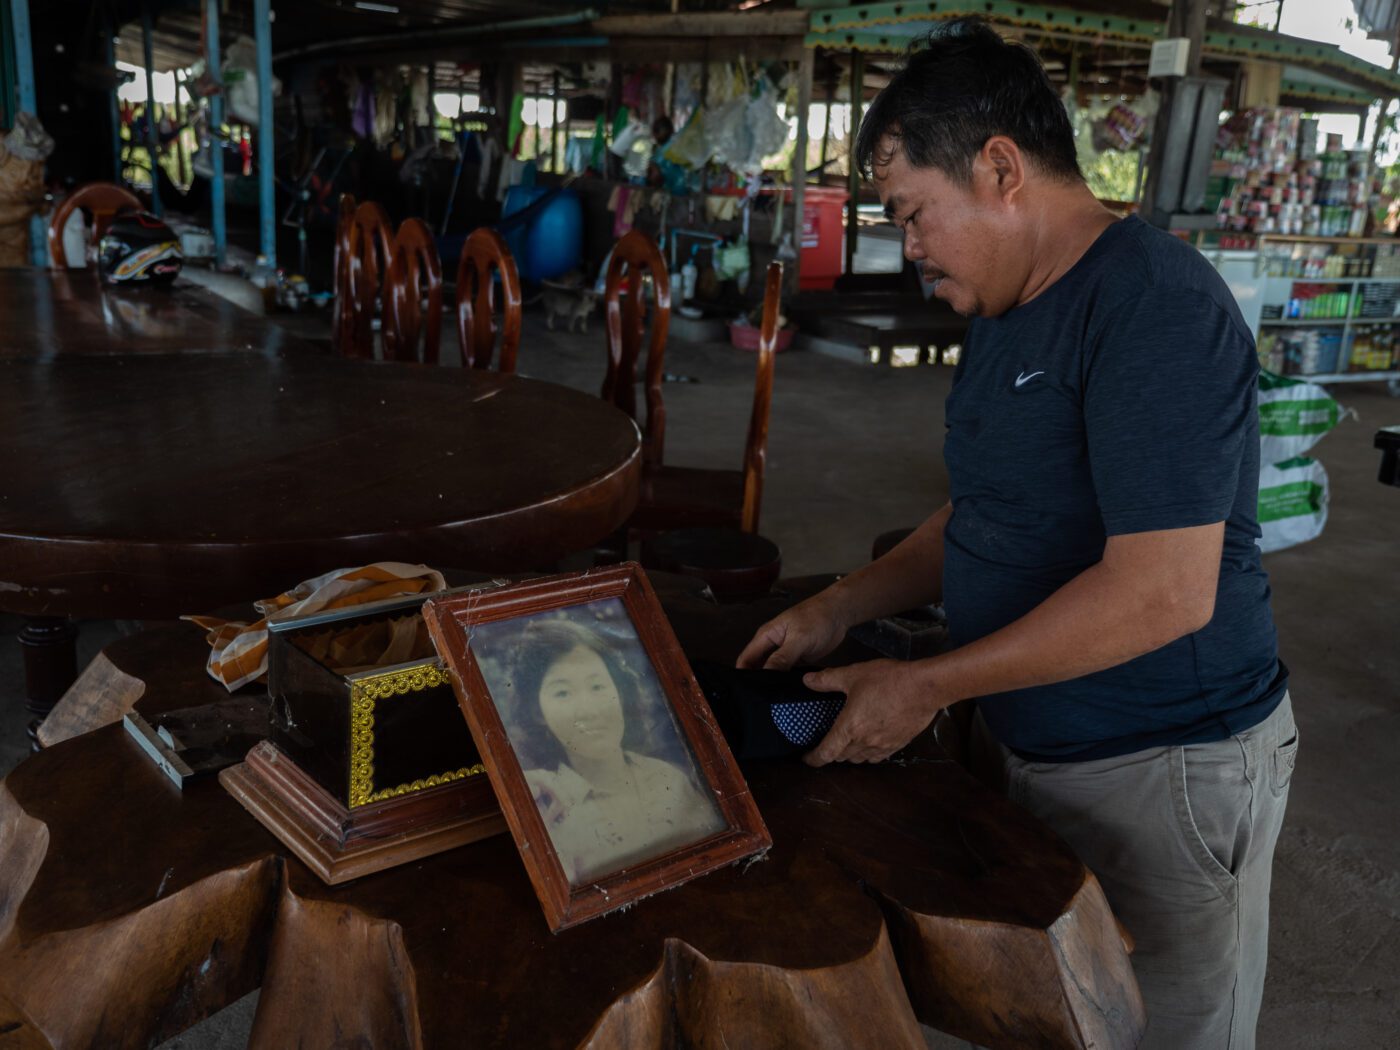 Hak Yang Phoeuk with a portrait of his sister Mak Thy Mai, who was killed in a 1998 attack by Khmer Rouge militants targeting ethnic Vietnamese residents of Chhnok Trou village.